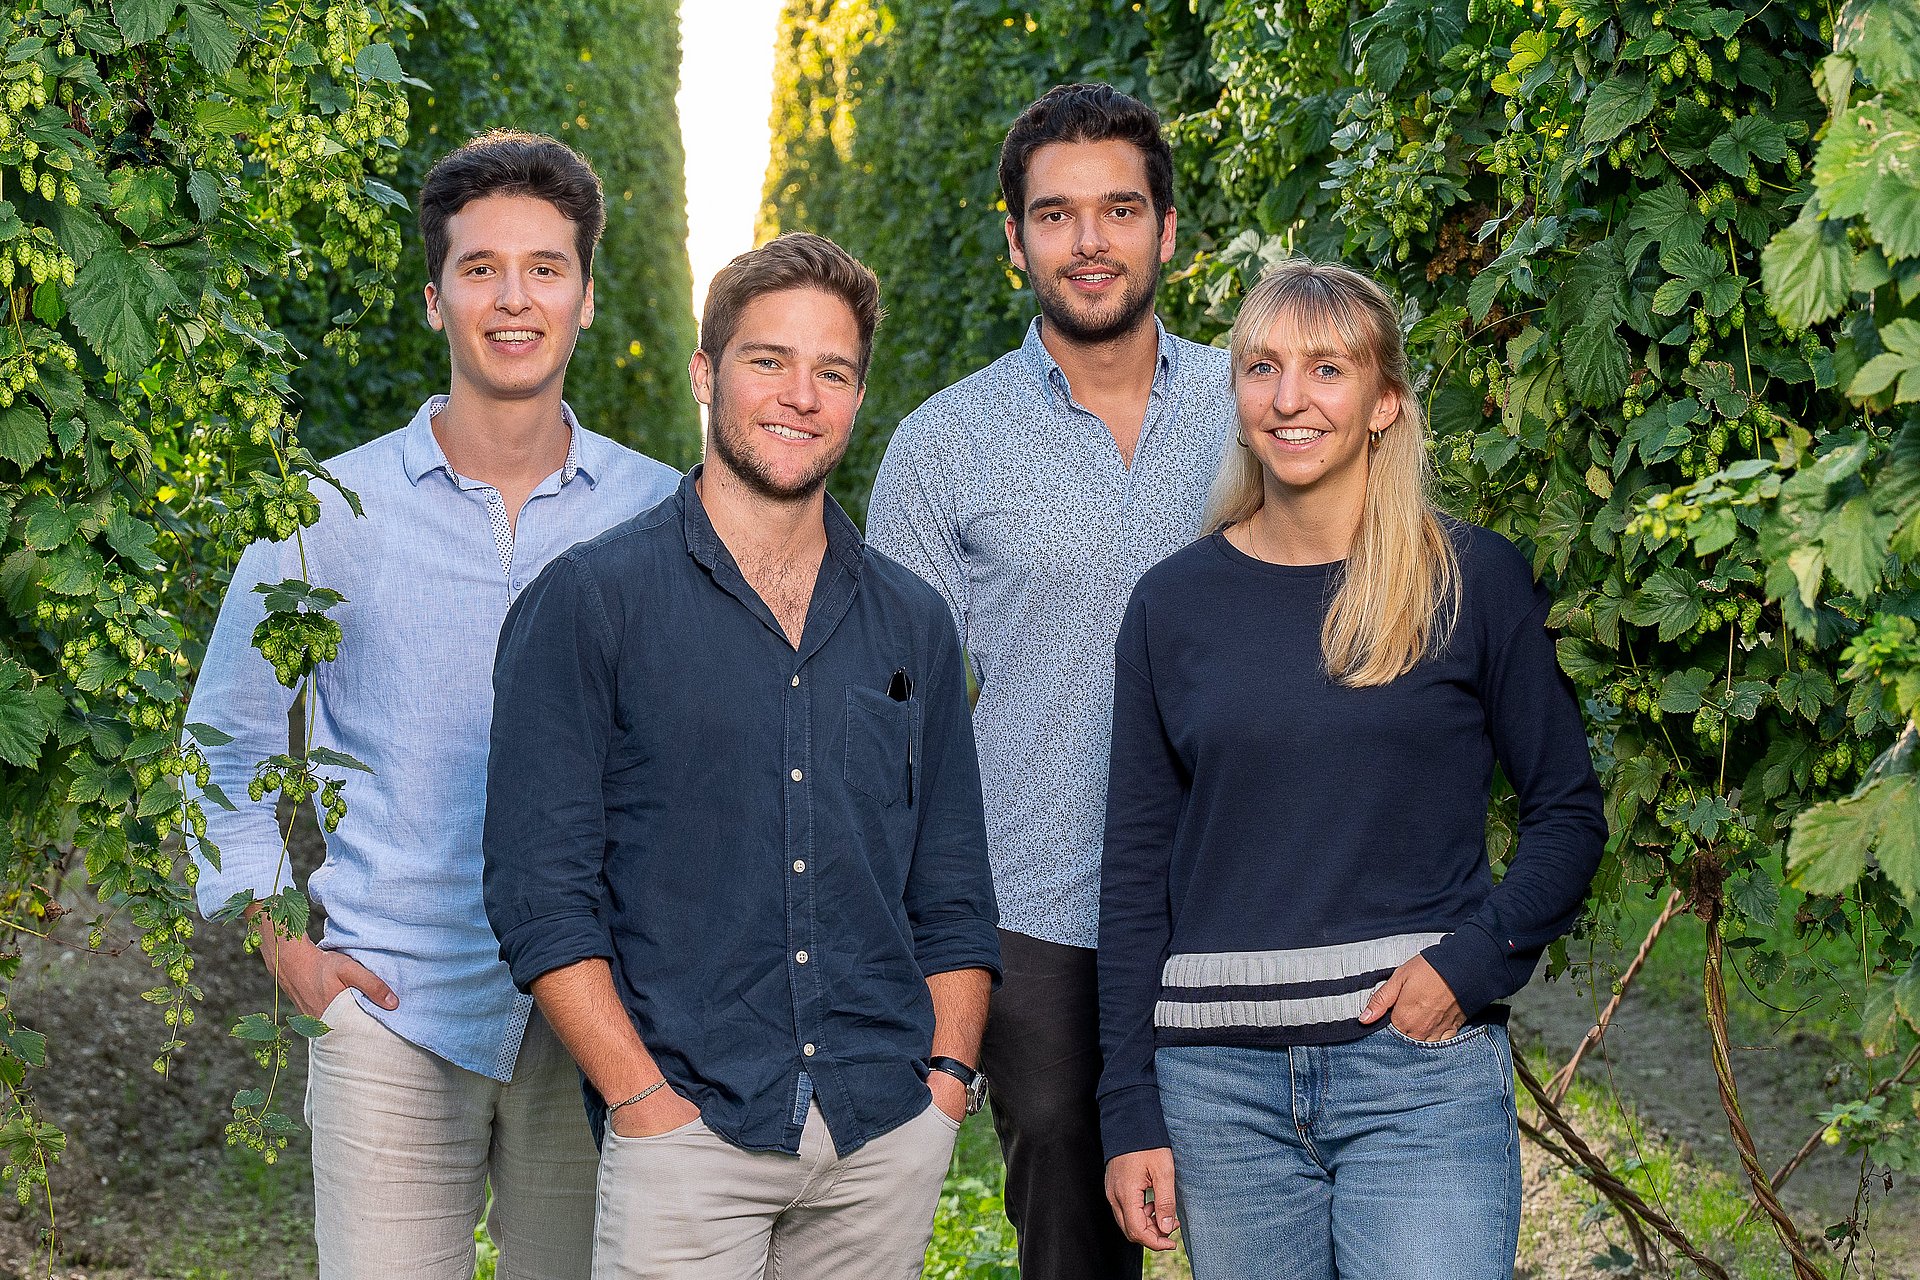 The HopfON team stands between the hop vines in the field